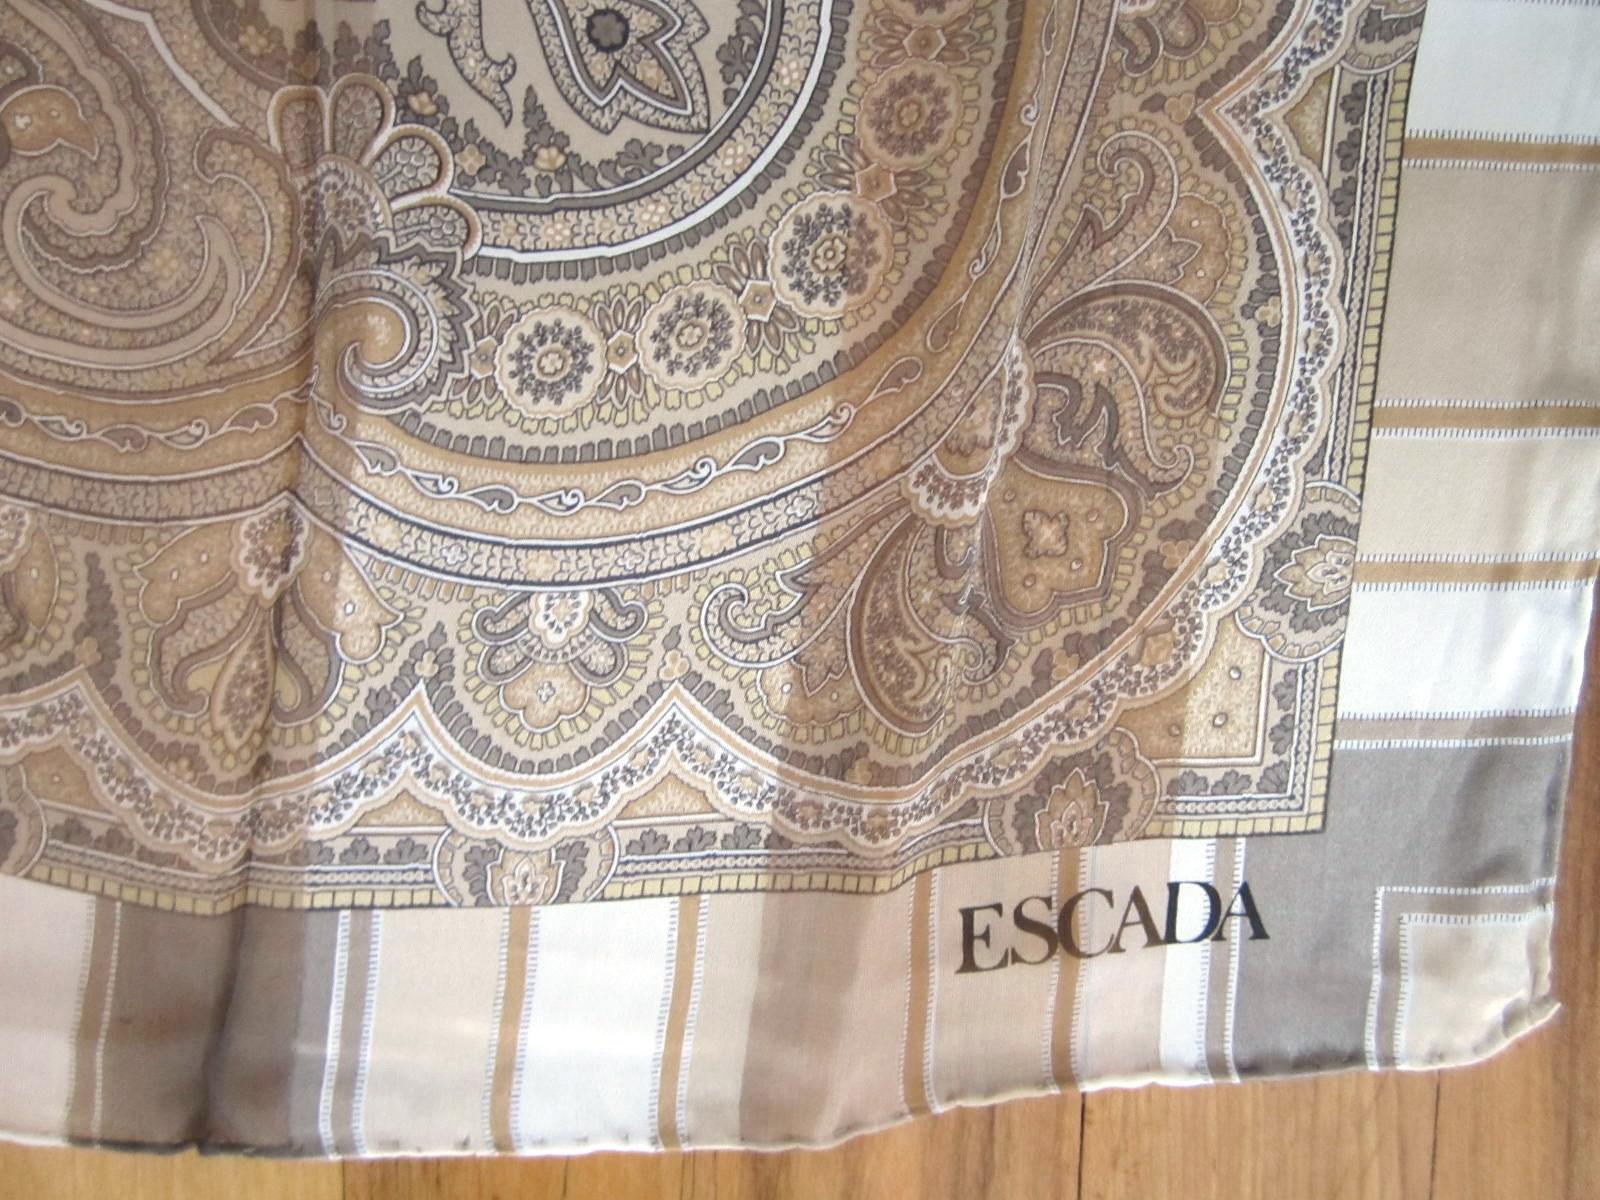 New Never has been worn Silk Paisley Escada scarf.  Original Neiman Marcus tag still attached. This is from a Vast Collection of Scarves that have never been worn Including Gucci and Hermes. Made in Italy. Hand Rolled Silk. This is out of our